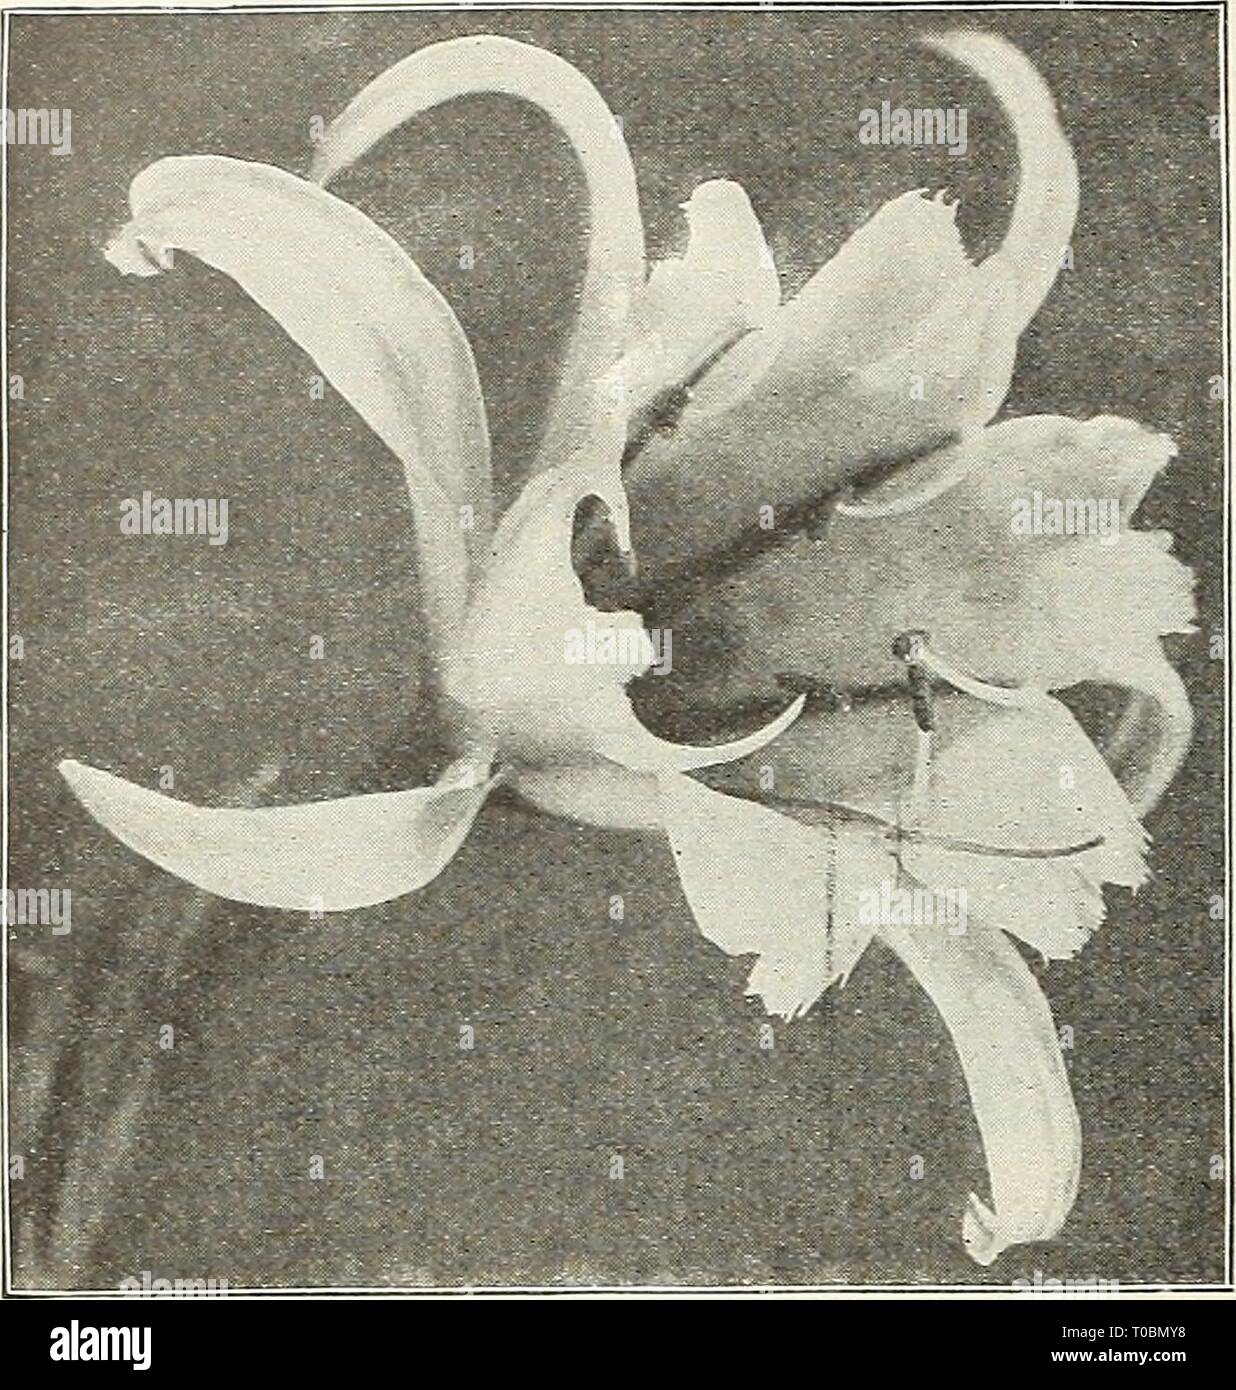 Dreer's garden book 1927 (1927) Dreer's garden book 1927 dreersgardenbook1927henr Year: 1927  164 flEiffiyA-Bim^ .GARDENAm GREENHOUSE PIANm MMm    ISMENE (Panivian Daffodil) Hibiscus Sinensis (Chinese Hibiscus) Well-known evergreen tender shrubs which may be grown either in a pot or tub, or planted out during the summer. They flower freely during the entire summer, and even in the winter if kept in a light, sunny position in the house. Aurantiacus. Fine double pure salmon. Grandiflorus. Very large single rose. Miniatus Semi-plenus. The finest and most brilliant semi- double, vermilion-scarlet, Stock Photo